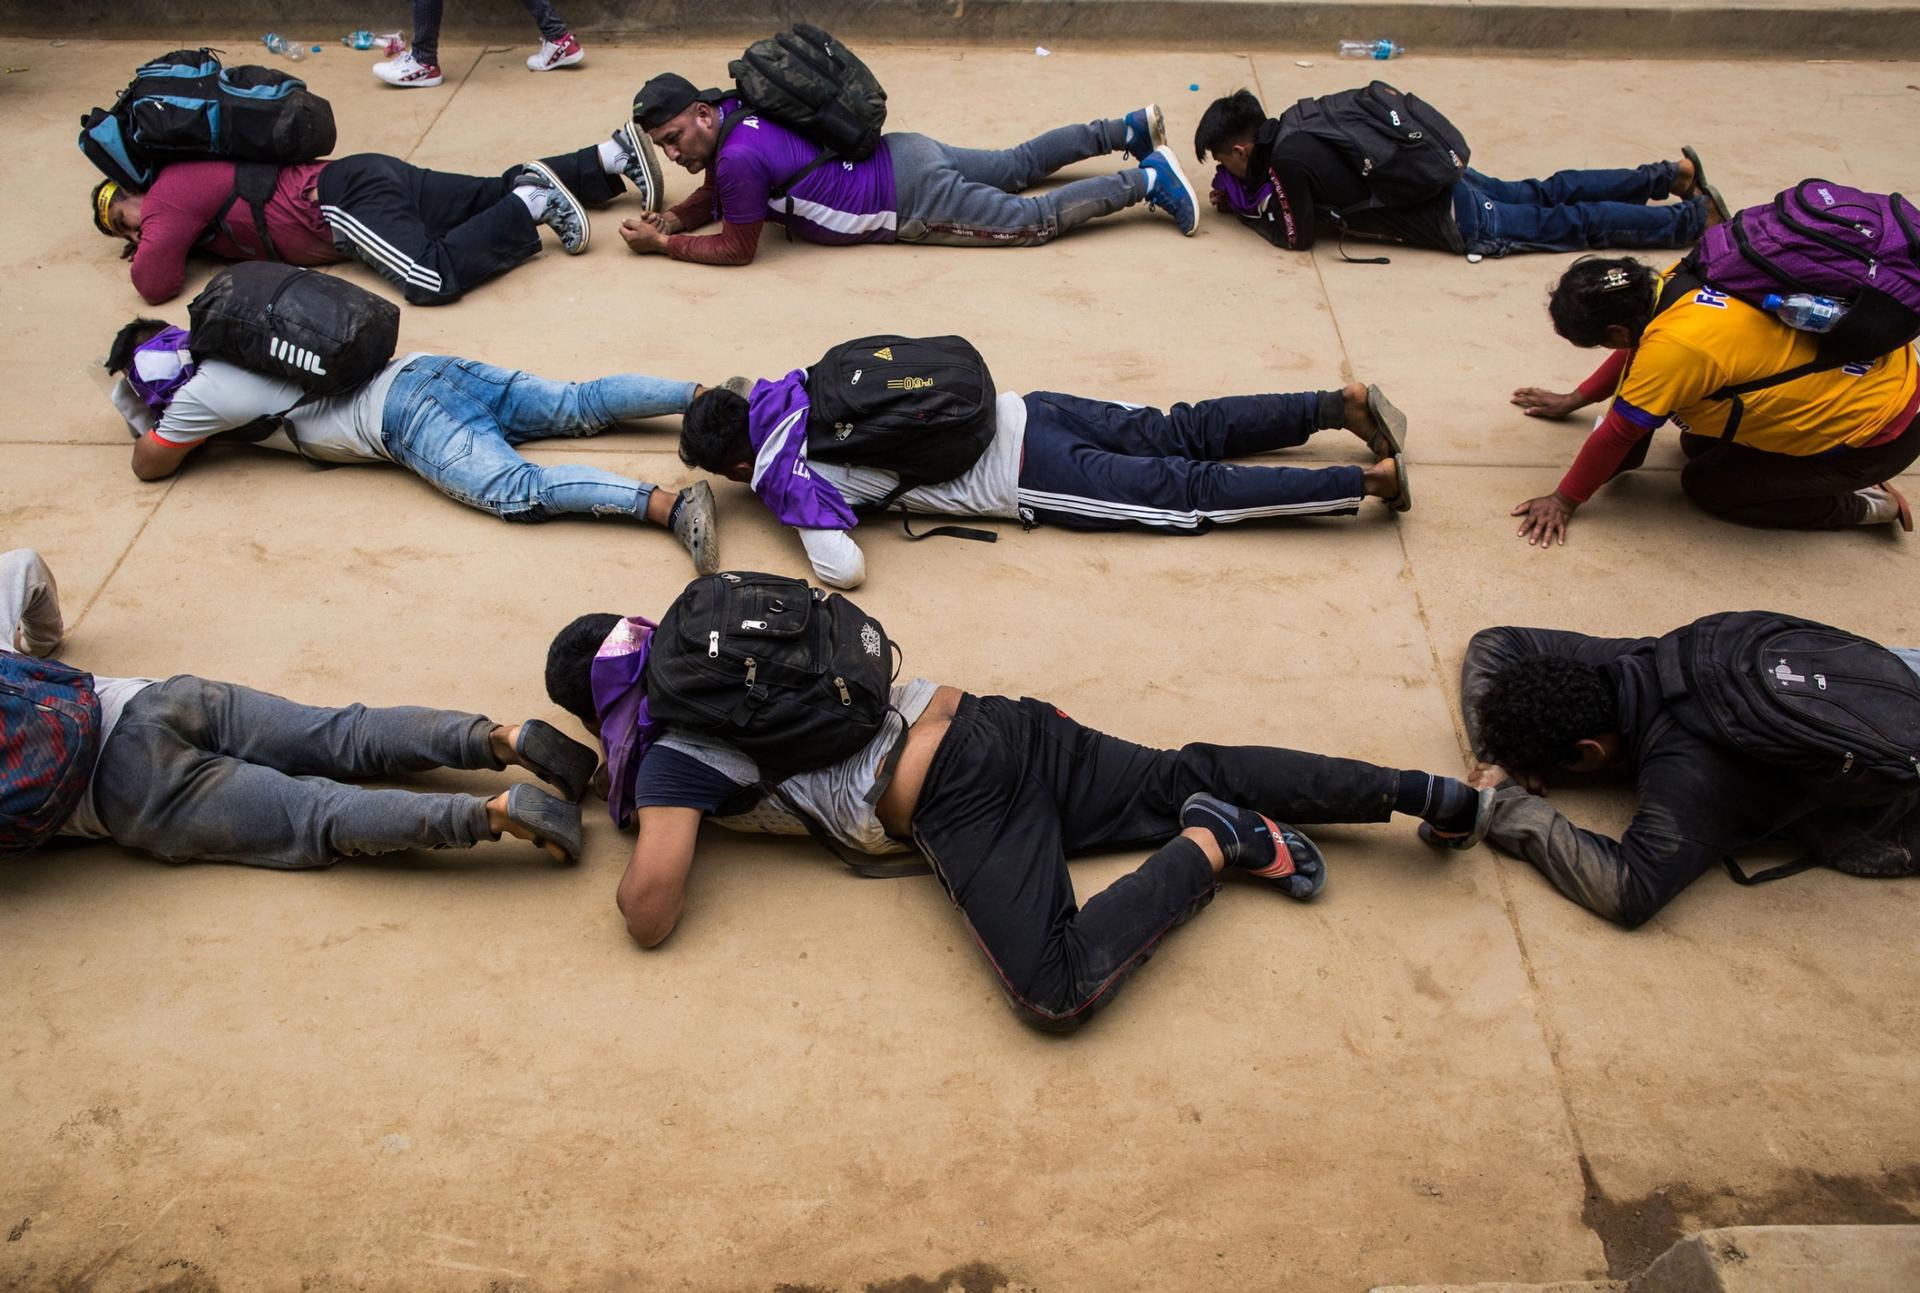 Several people are shown crawling on their stomachs on the ground and wearing backpacks.